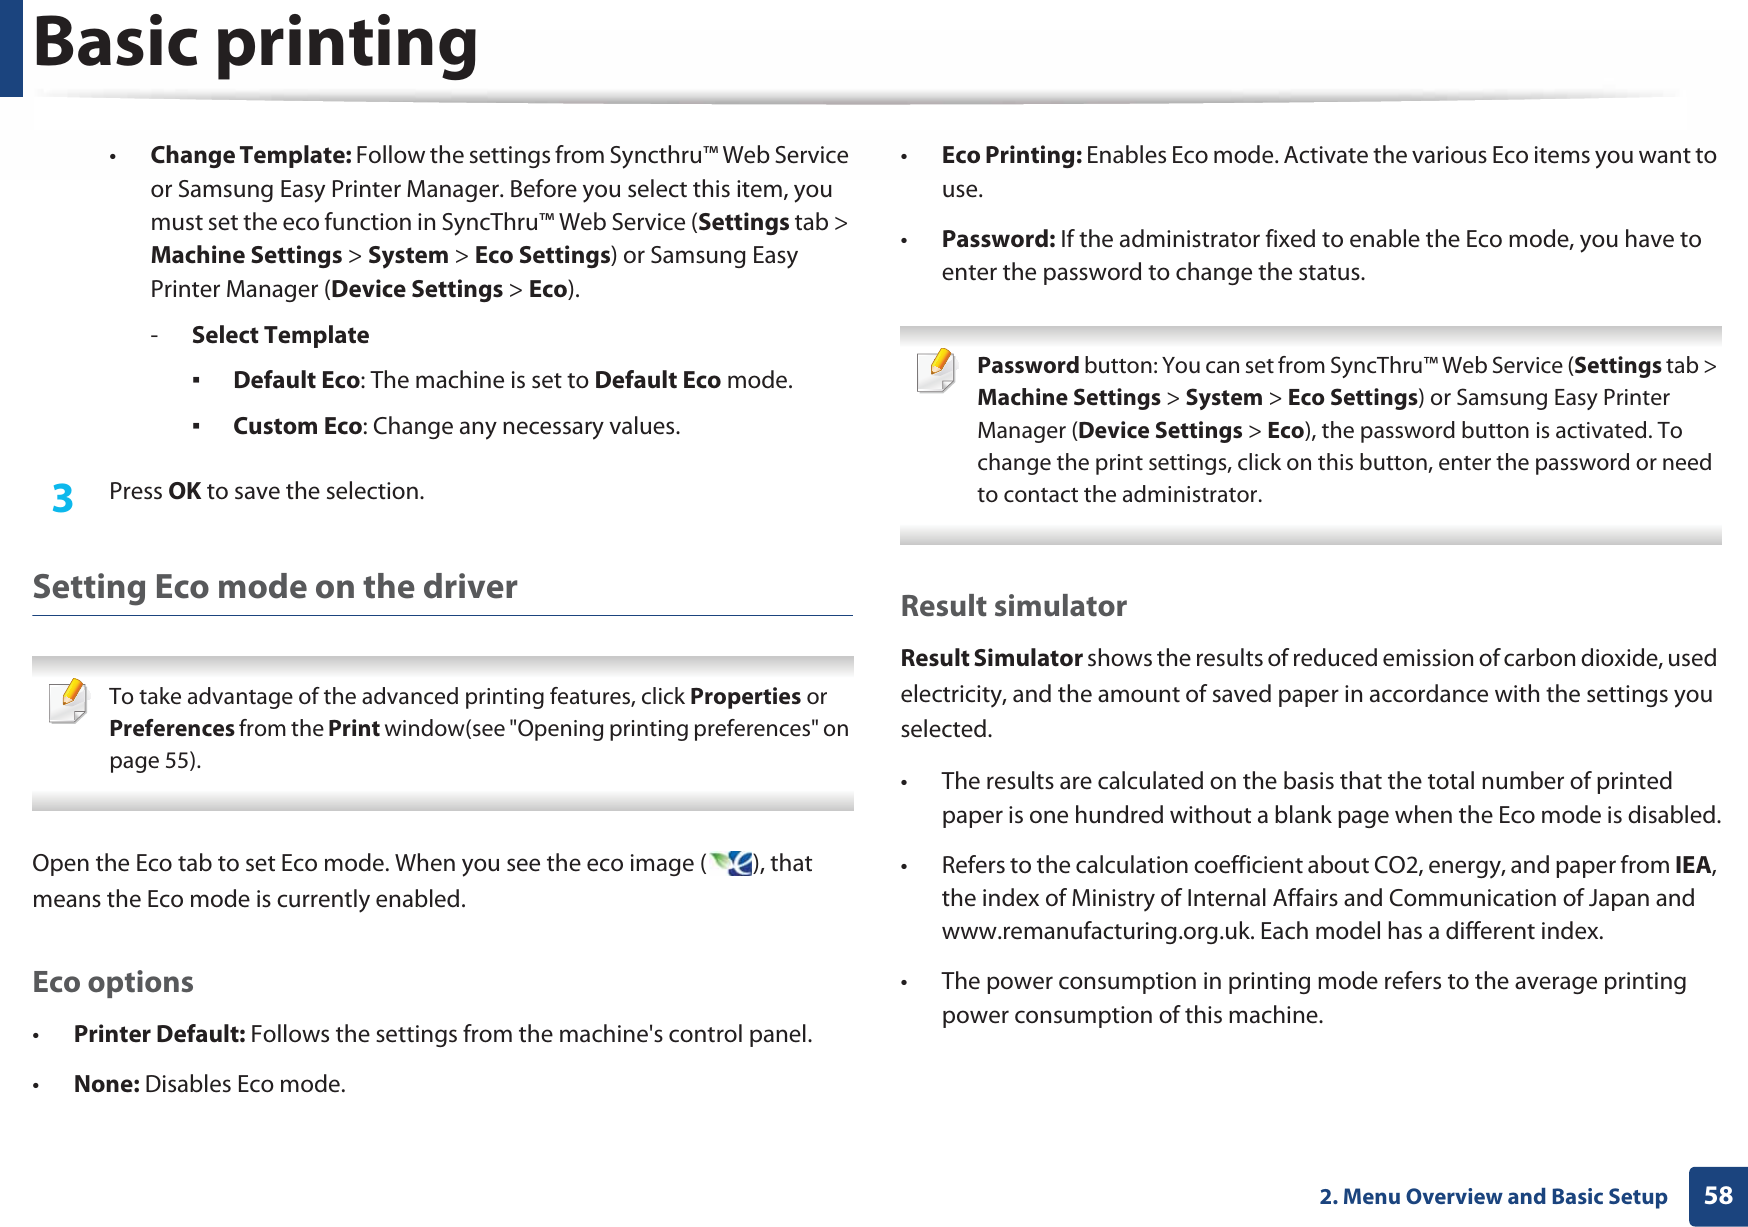 Basic printing582. Menu Overview and Basic Setup•Change Template: Follow the settings from Syncthru™ Web Service or Samsung Easy Printer Manager. Before you select this item, you must set the eco function in SyncThru™ Web Service (Settings tab &gt; Machine Settings &gt; System &gt; Eco Settings) or Samsung Easy Printer Manager (Device Settings &gt; Eco). -Select TemplateƒDefault Eco: The machine is set to Default Eco mode.ƒCustom Eco: Change any necessary values.3  Press OK to save the selection.Setting Eco mode on the driver To take advantage of the advanced printing features, click Properties or Preferences from the Print window(see &quot;Opening printing preferences&quot; on page 55). Open the Eco tab to set Eco mode. When you see the eco image ( ), that means the Eco mode is currently enabled.Eco options•Printer Default: Follows the settings from the machine&apos;s control panel.•None: Disables Eco mode.•Eco Printing: Enables Eco mode. Activate the various Eco items you want to use.•Password: If the administrator fixed to enable the Eco mode, you have to enter the password to change the status. Password button: You can set from SyncThru™ Web Service (Settings tab &gt; Machine Settings &gt; System &gt; Eco Settings) or Samsung Easy Printer Manager (Device Settings &gt; Eco), the password button is activated. To change the print settings, click on this button, enter the password or need to contact the administrator. Result simulatorResult Simulator shows the results of reduced emission of carbon dioxide, used electricity, and the amount of saved paper in accordance with the settings you selected.• The results are calculated on the basis that the total number of printed paper is one hundred without a blank page when the Eco mode is disabled.• Refers to the calculation coefficient about CO2, energy, and paper from IEA, the index of Ministry of Internal Affairs and Communication of Japan and www.remanufacturing.org.uk. Each model has a different index. • The power consumption in printing mode refers to the average printing power consumption of this machine. 